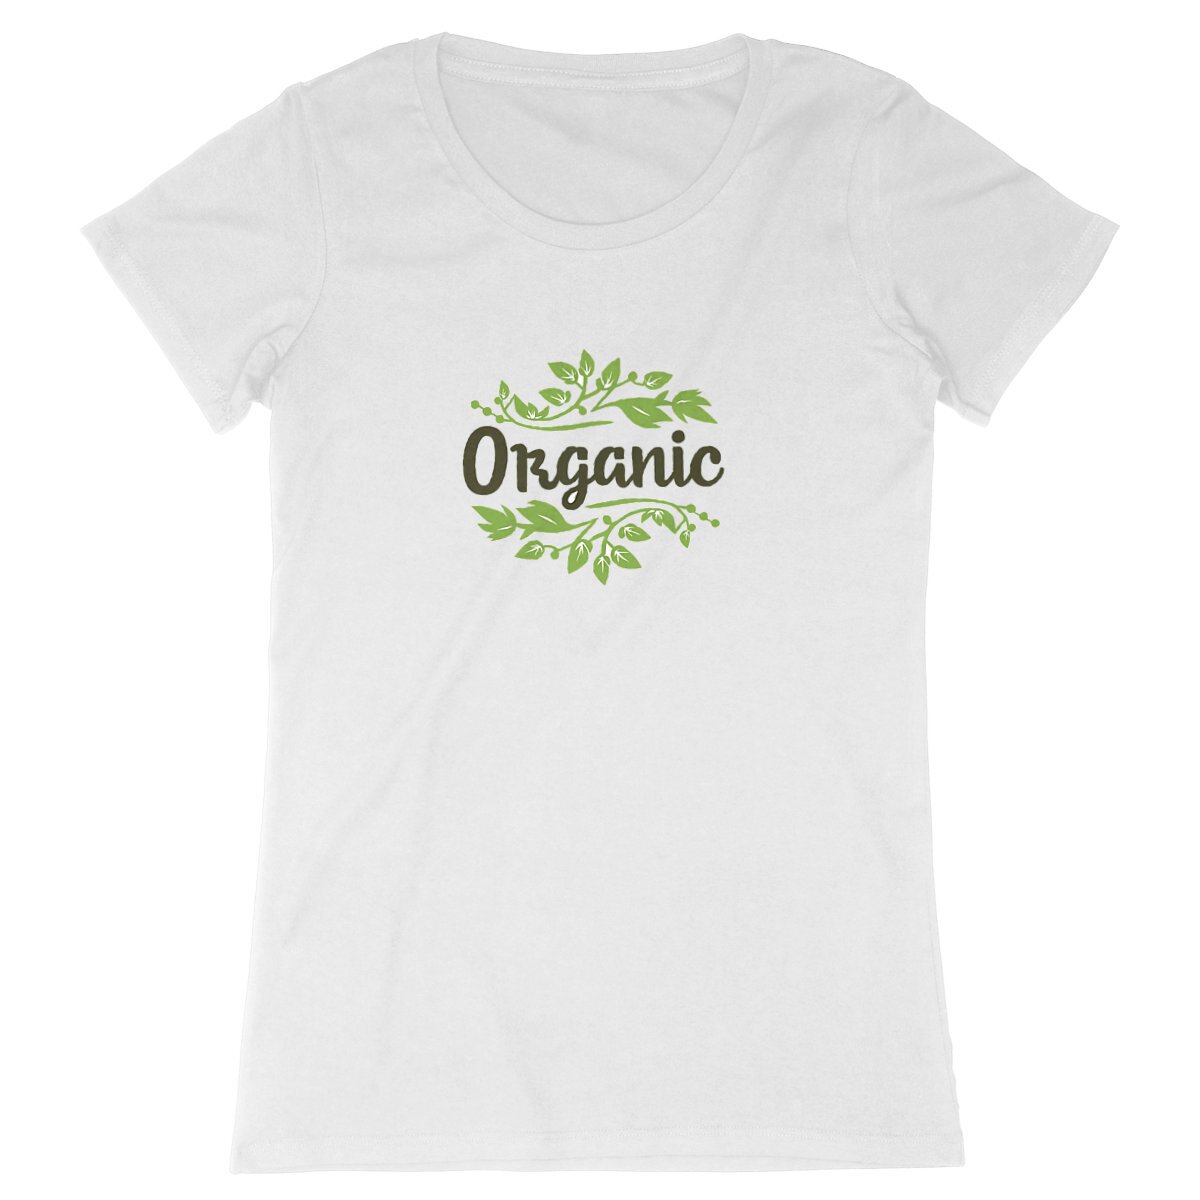 Natural Leaf Organic Cotton Graphic Tee | Hypoallergenic - Allergy Friendly - Naturally Free